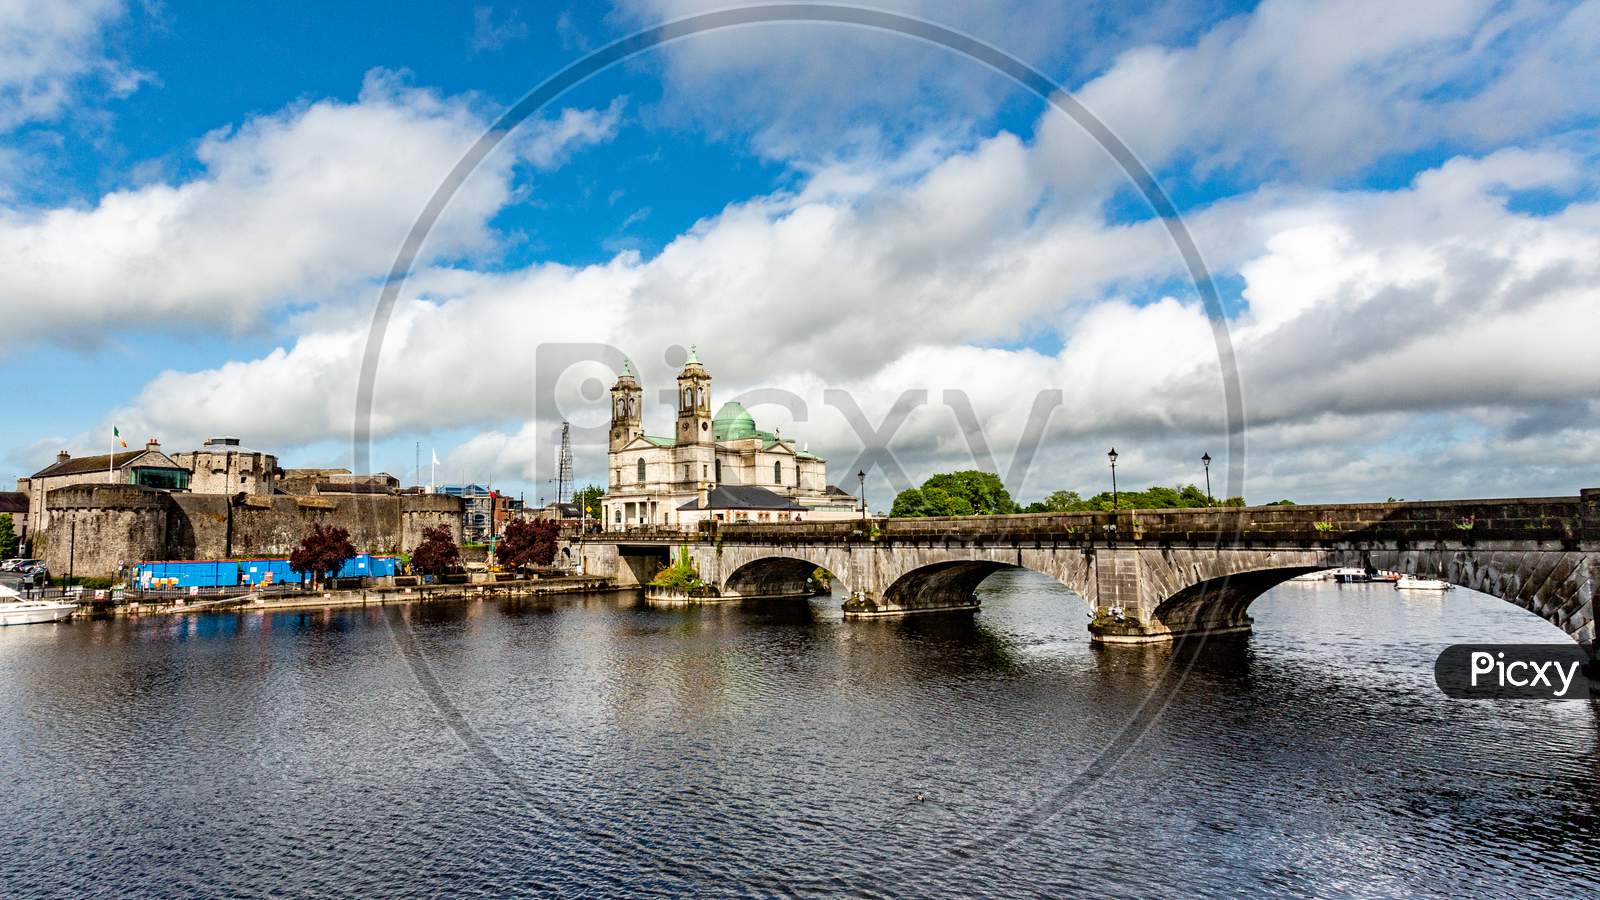 Beautiful View Of The River Shannon, The Bridge, The Parish Church Of Ss. Peter And Paul And The Castle In The Village Of Athlone, Wonderful Day In The County Of Westmeath, Ireland